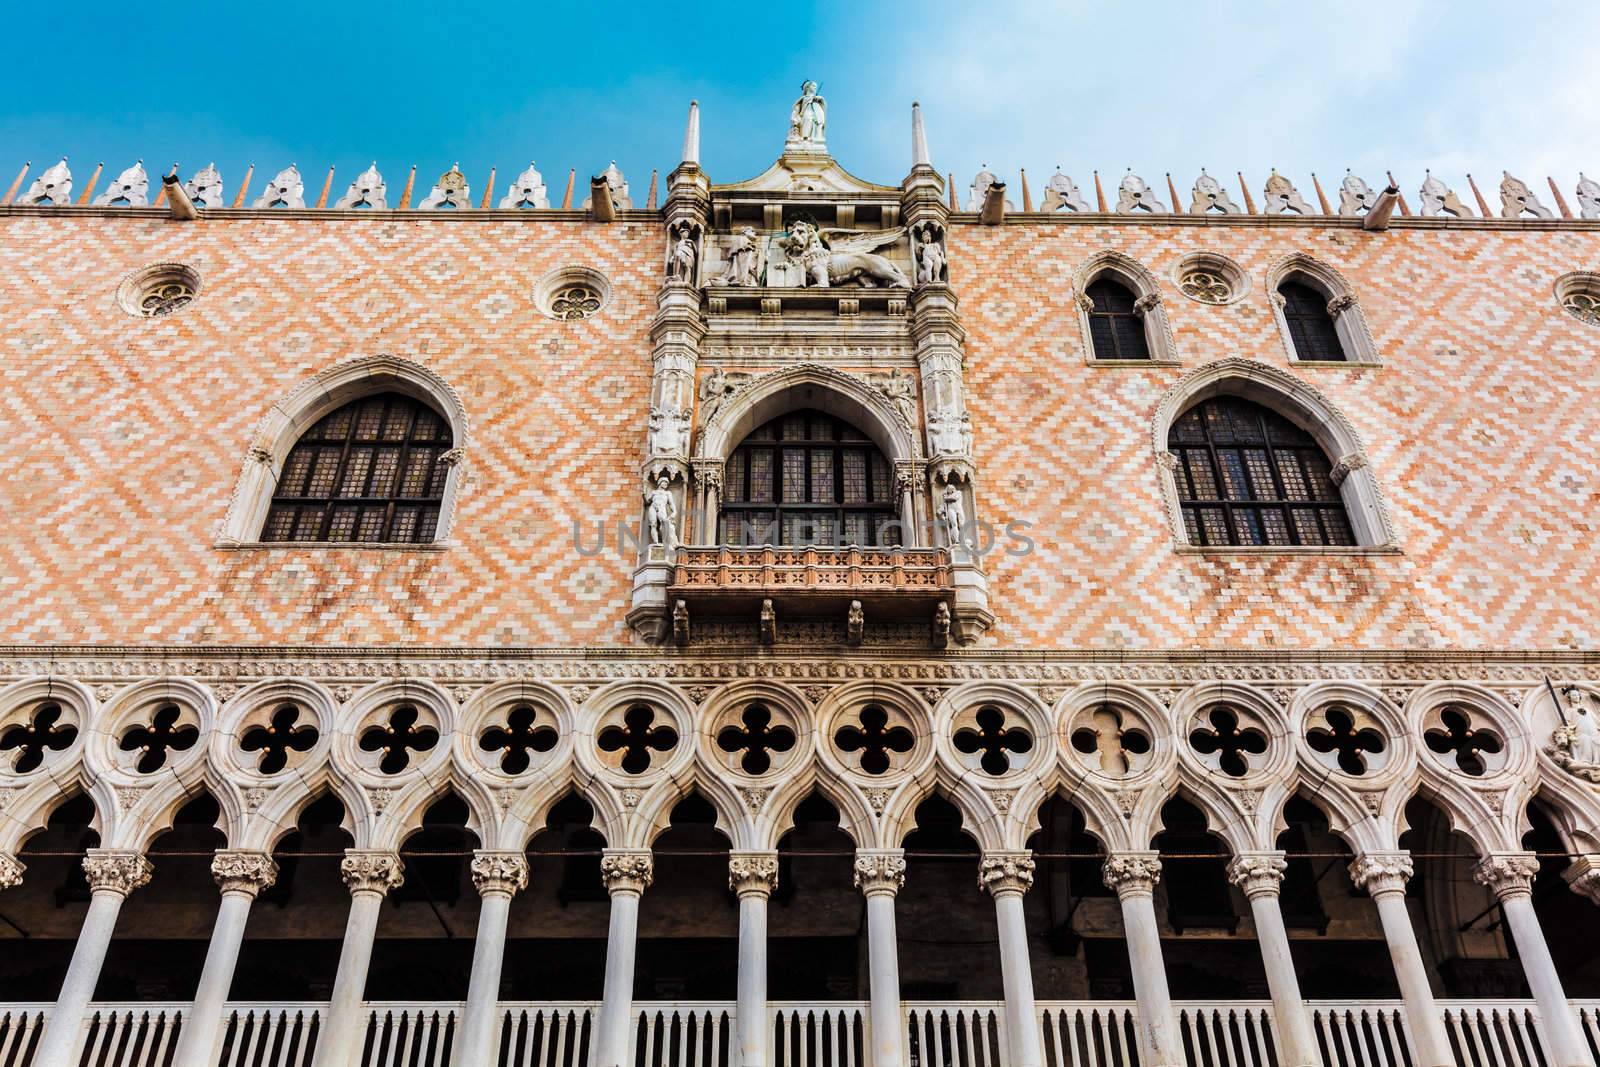 The Doge's Palace (Italian: Palazzo Ducale) in Venice, Italy